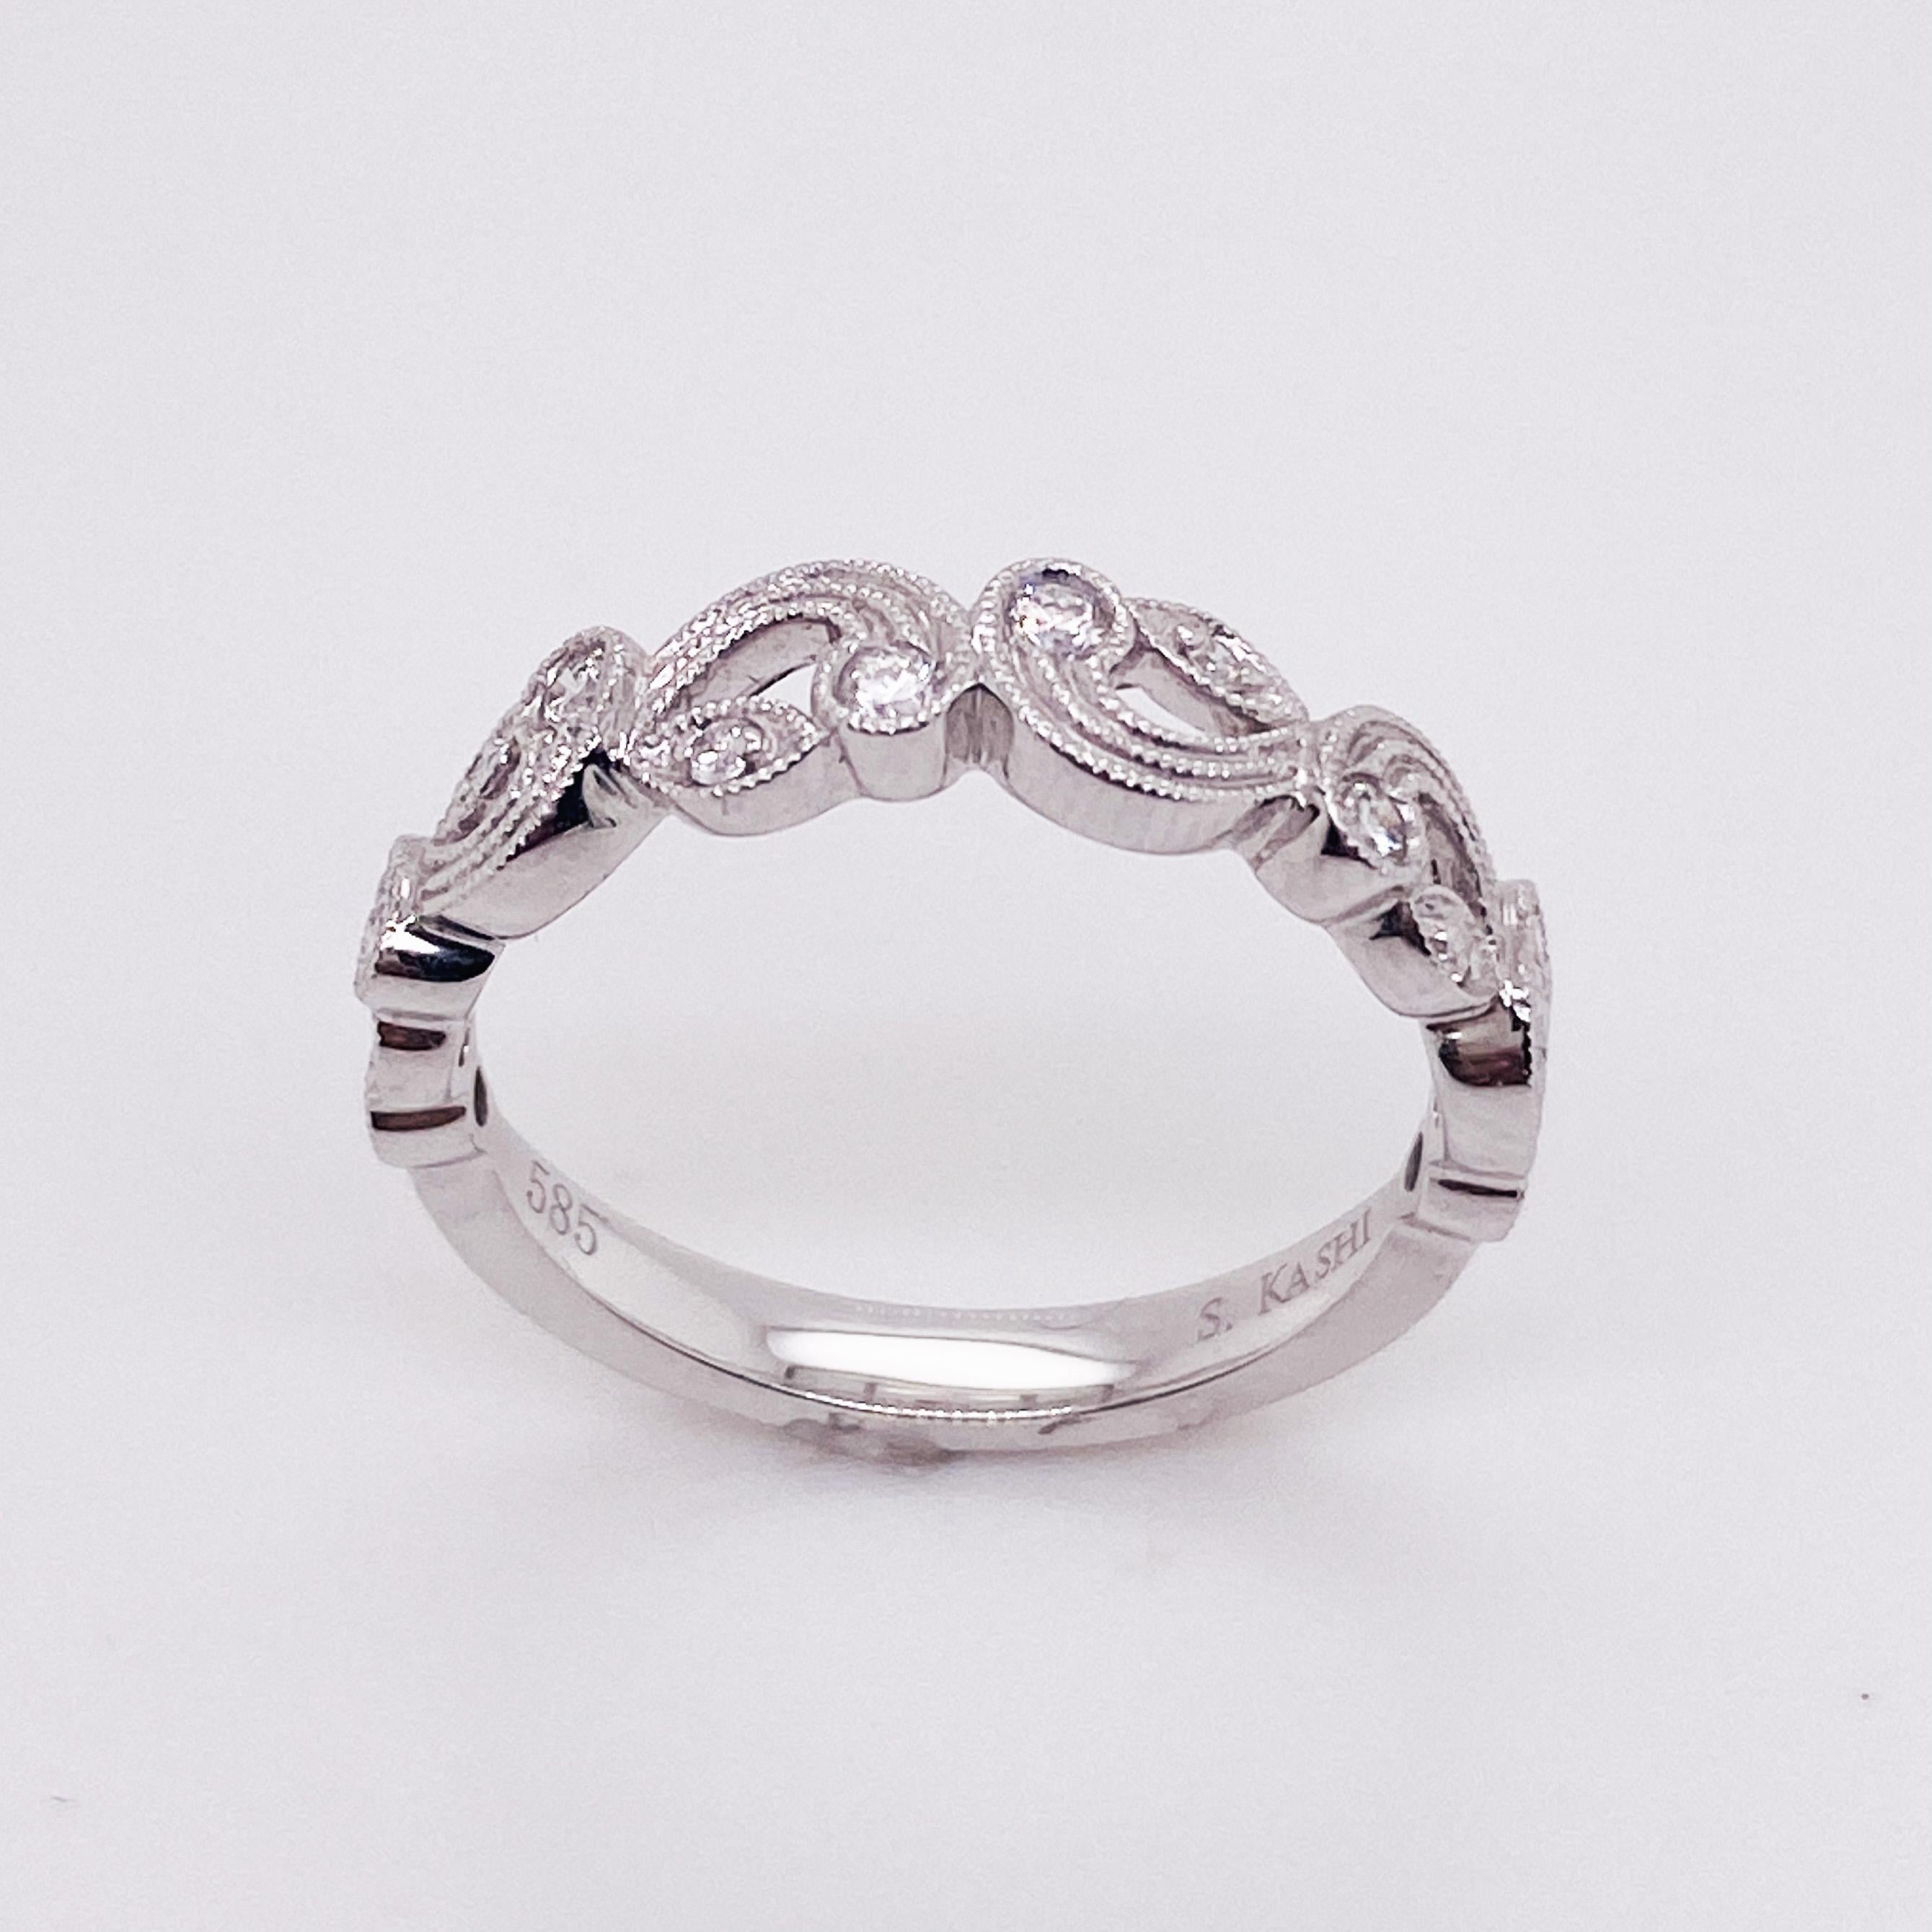 For Sale:  Diamond Floral Milgrain Stackable Band .18 Carat in 14k White Gold Wedding Band 3